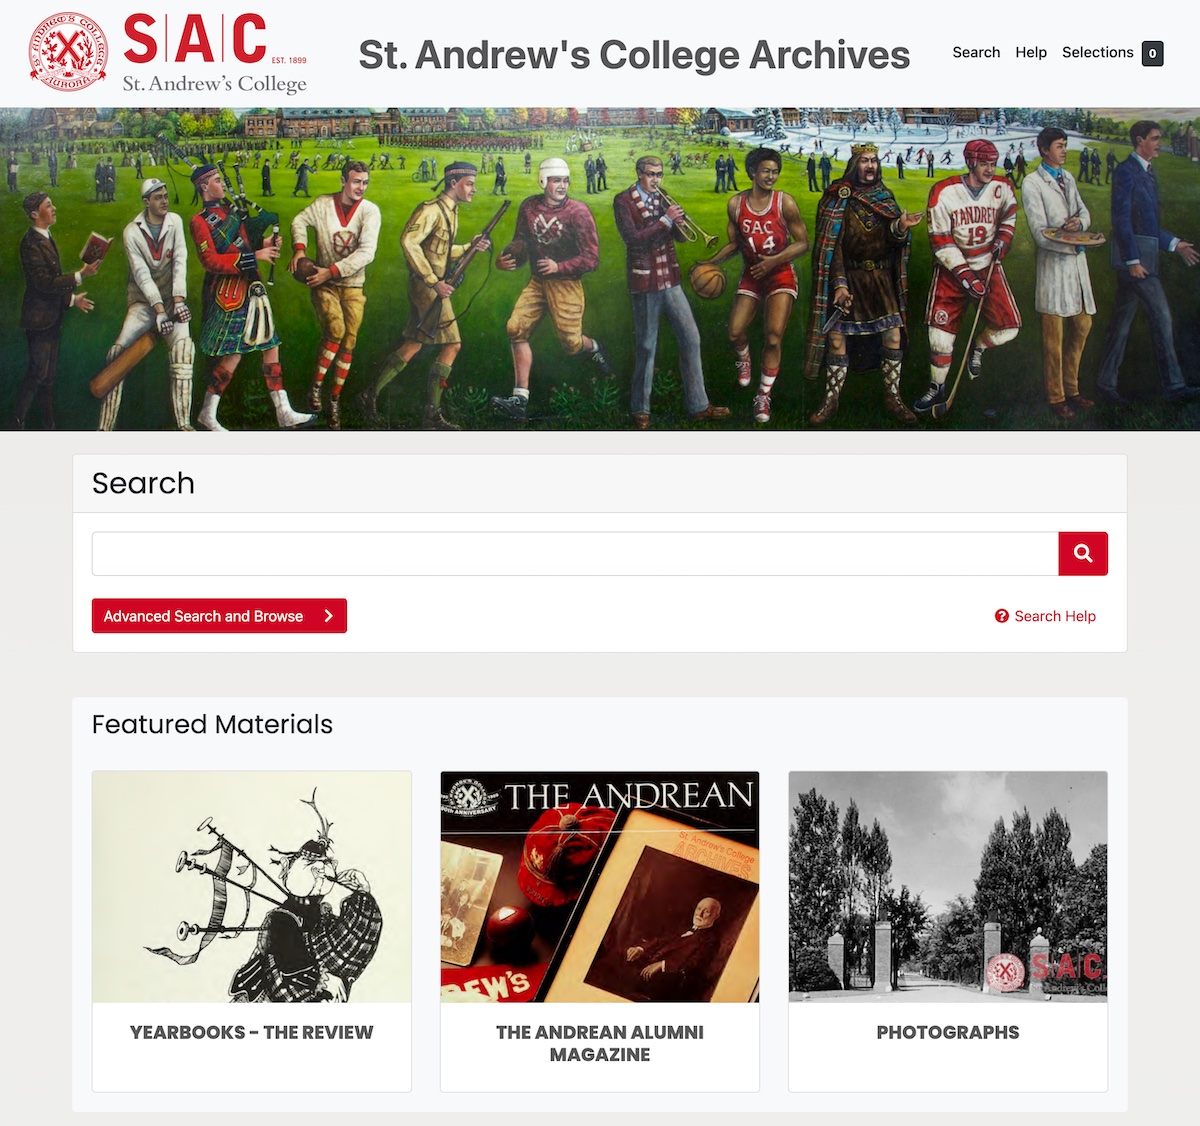 St. Andrew's College Archives Home Page